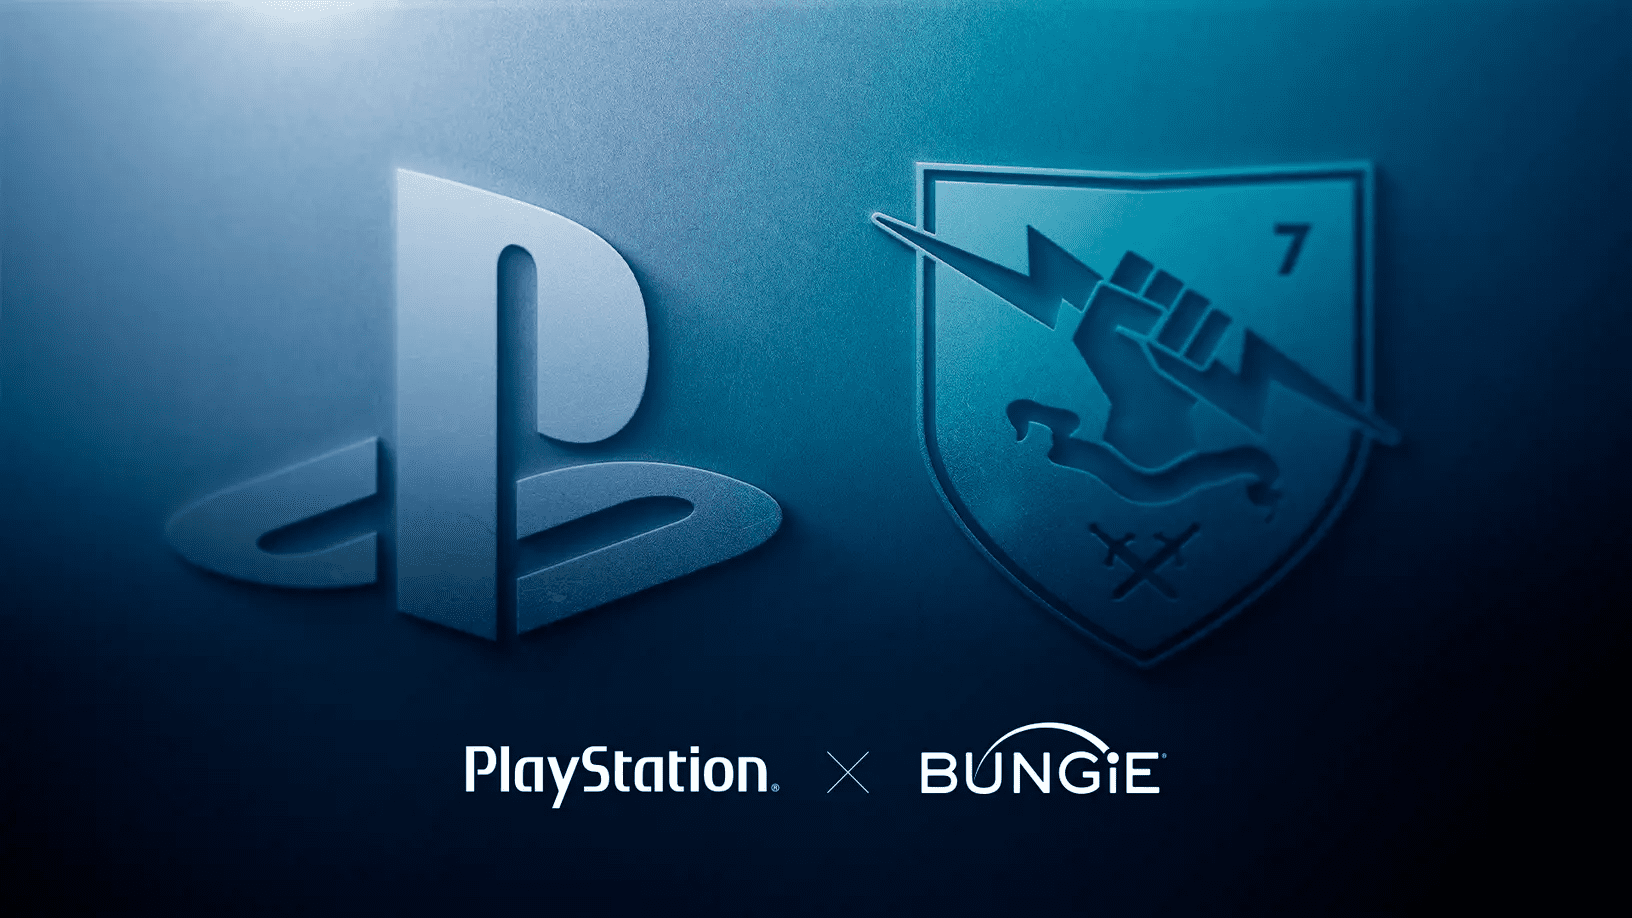 Not To Be Outdone, PlayStation Purchases Bungie